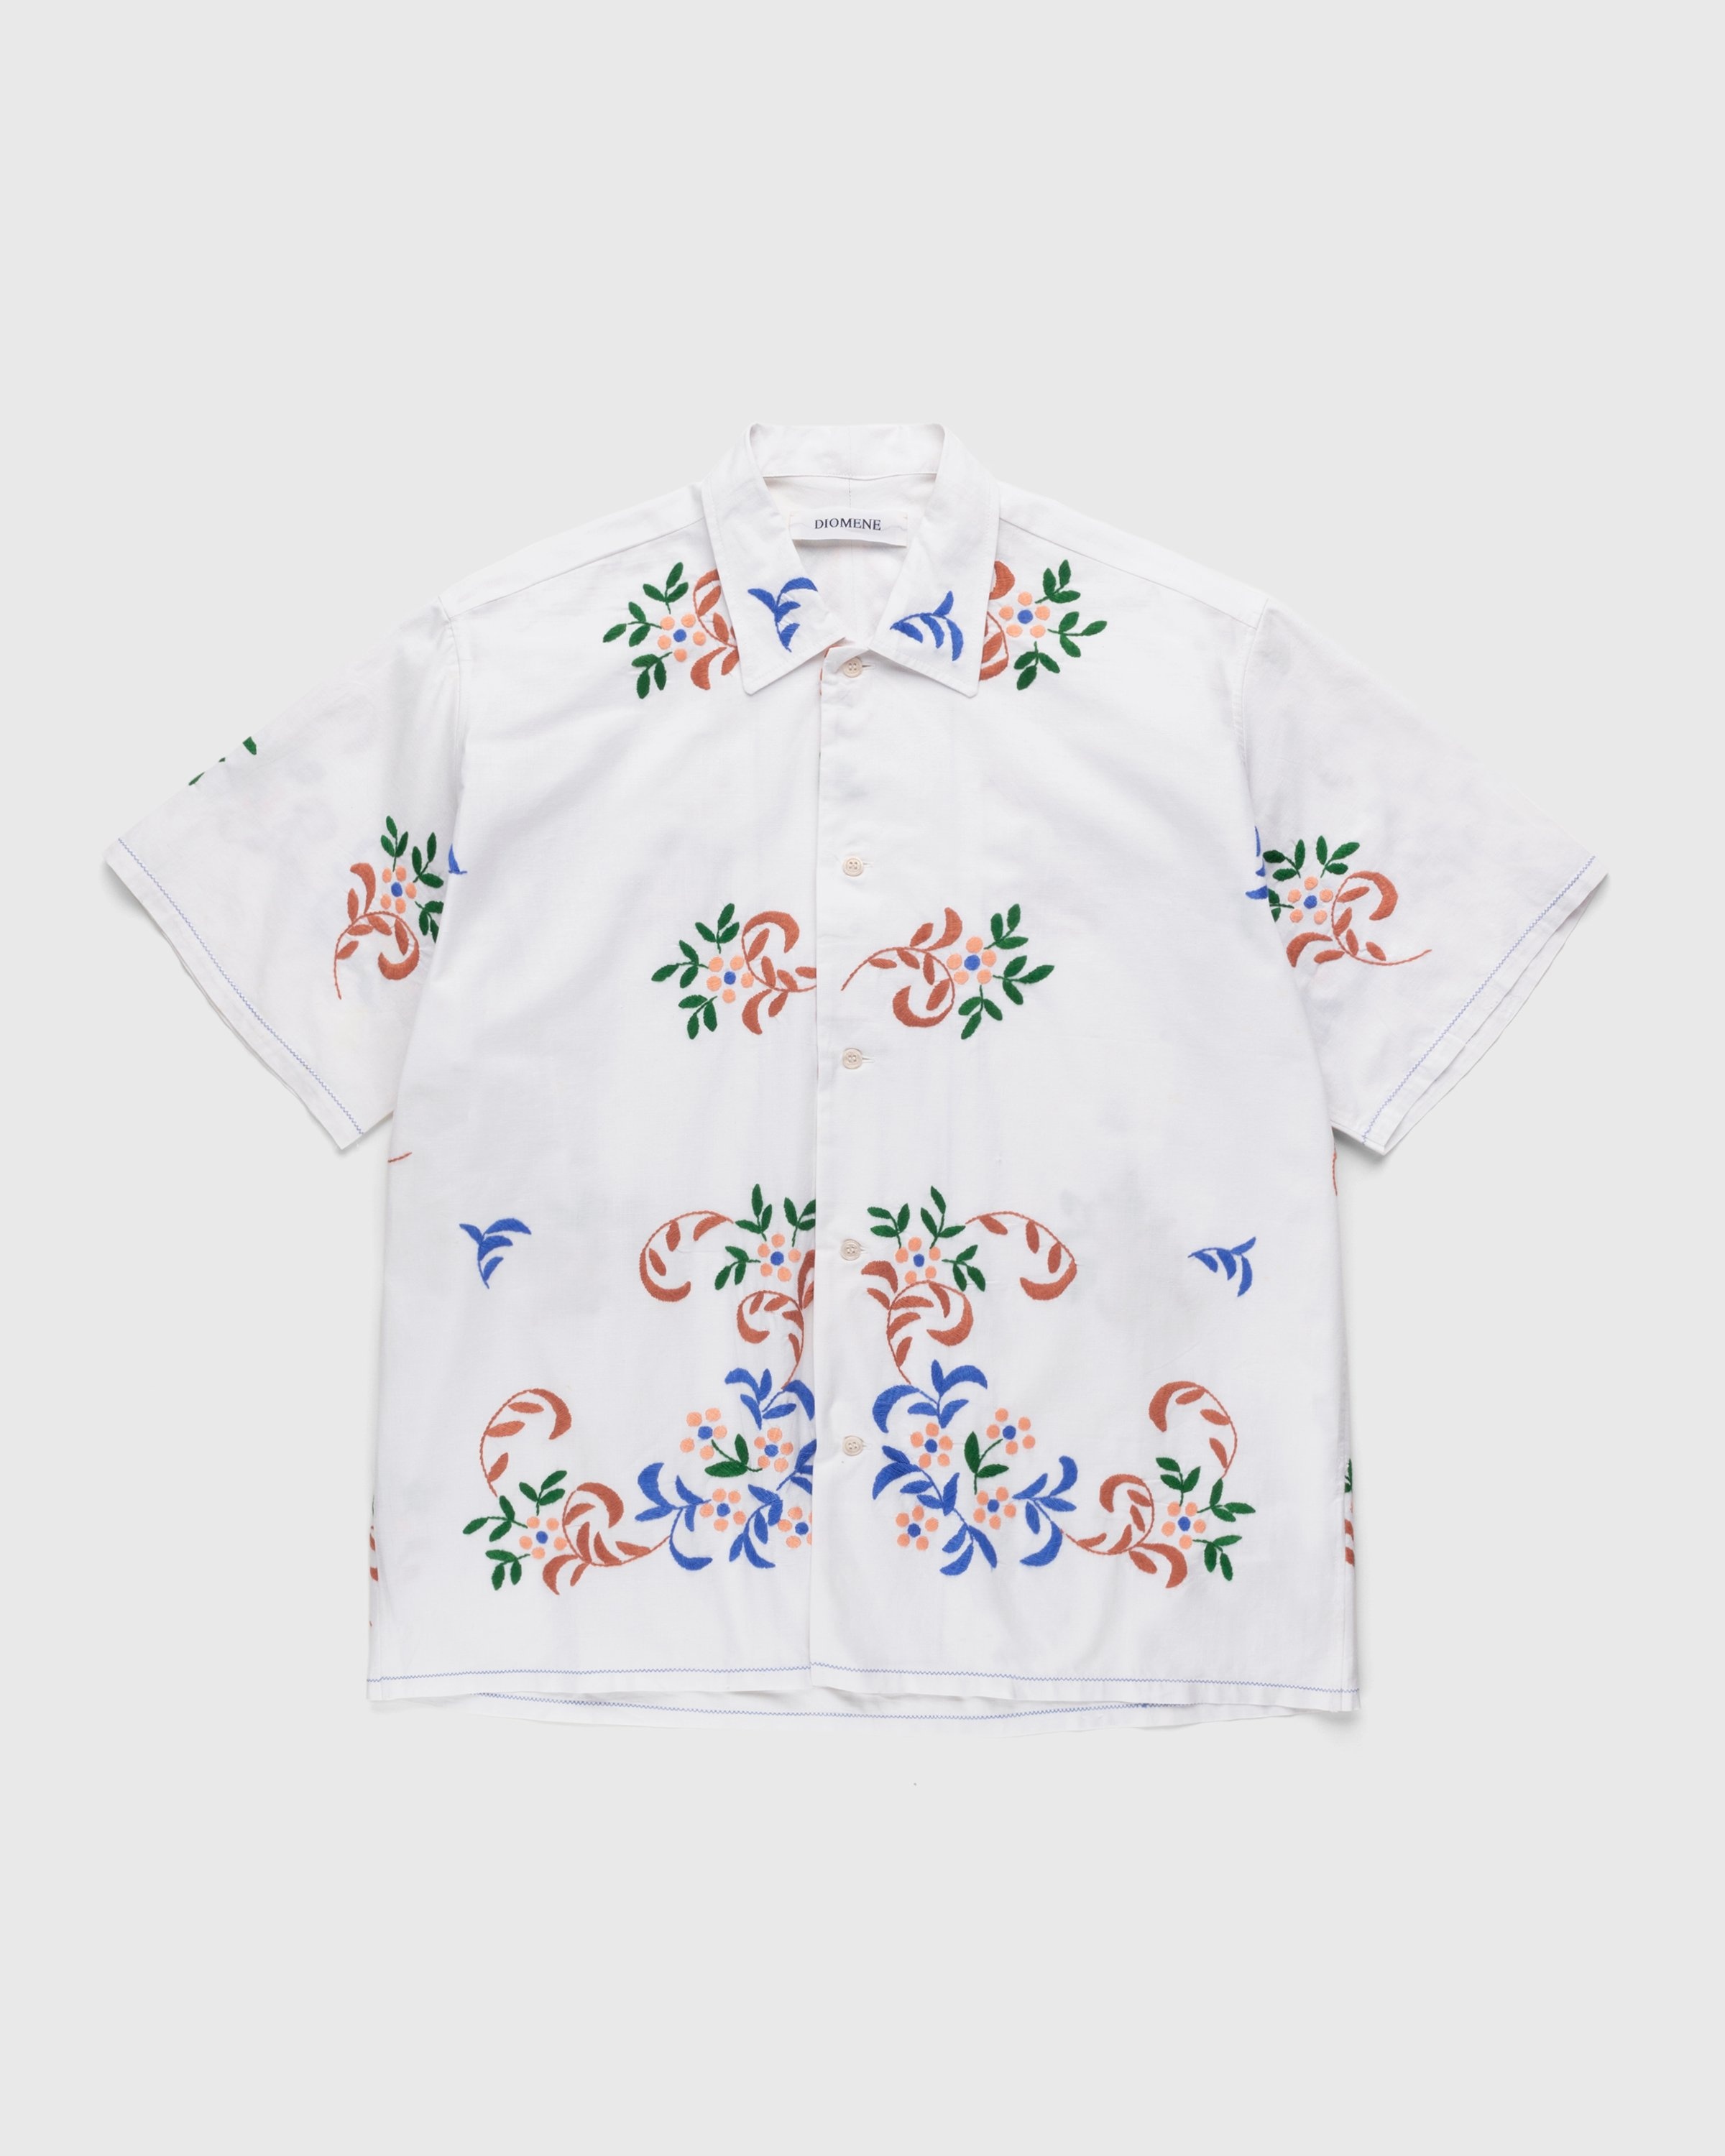 Diomene by Damir Doma – Embroidered Vacation Shirt White/Blue - Shirts - White - Image 1